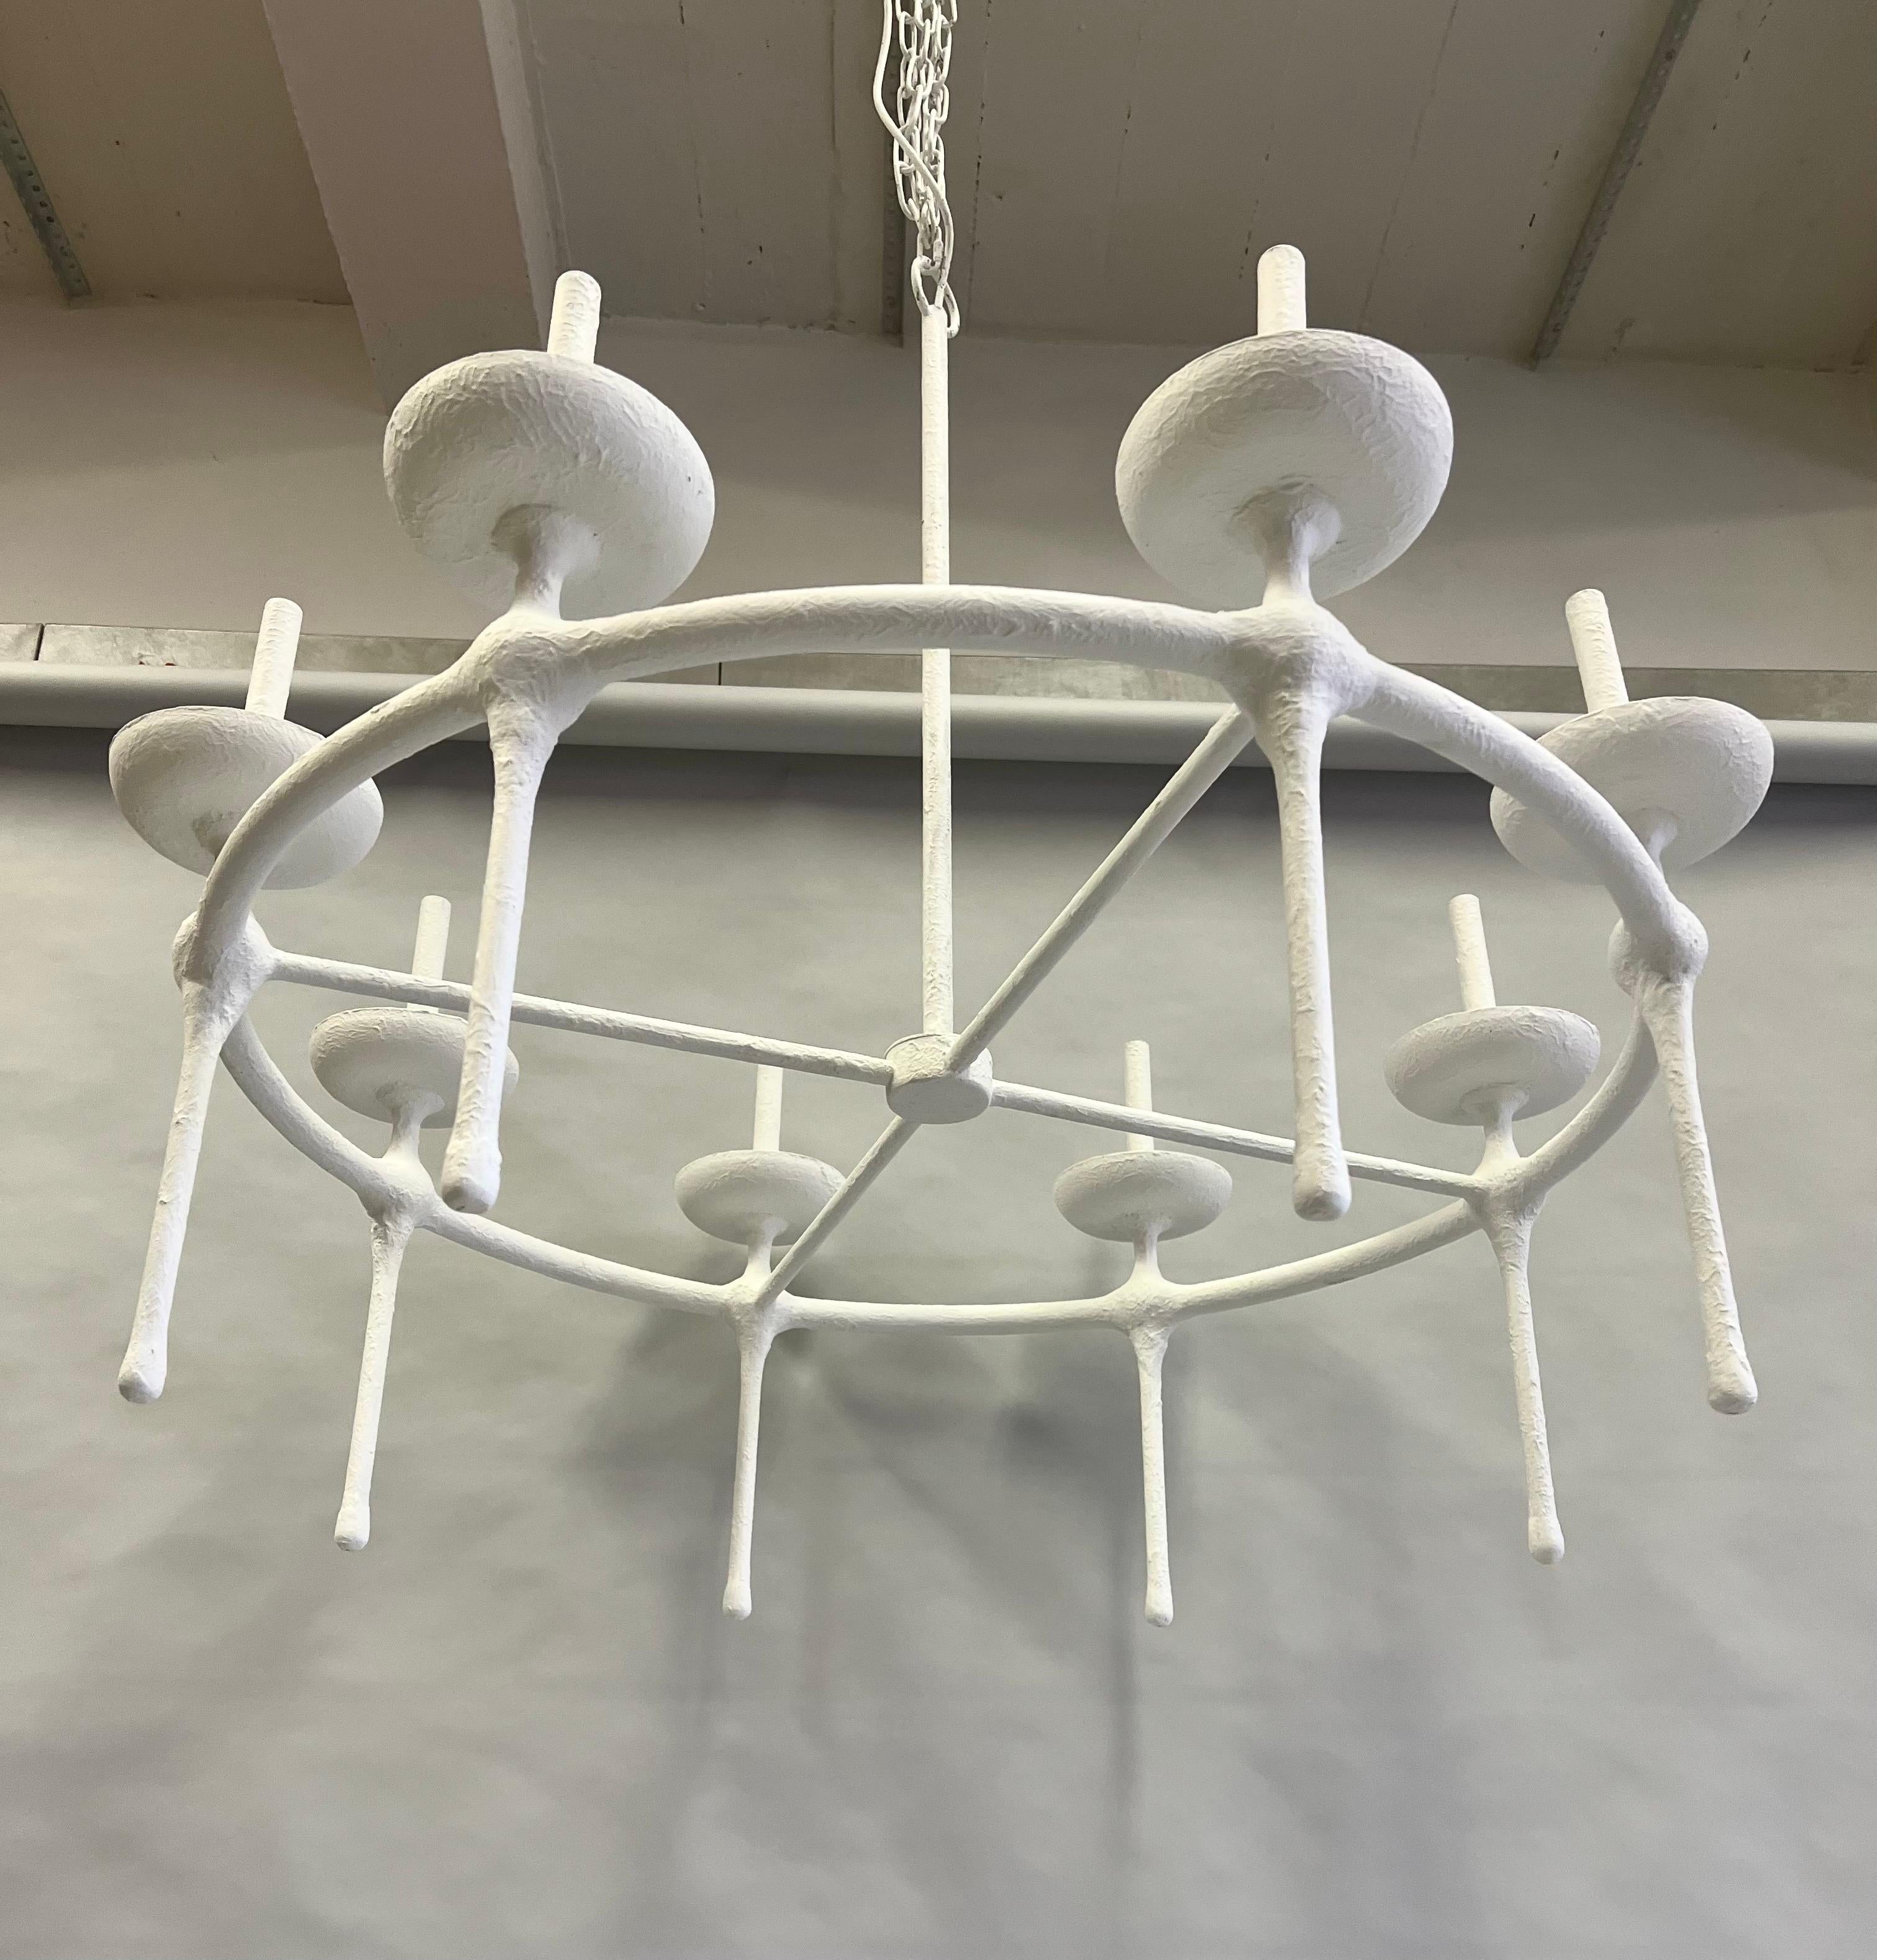 Hand-Crafted French, Modern Neoclassical Plaster Chandelier in the Style of Diego Giacometti For Sale